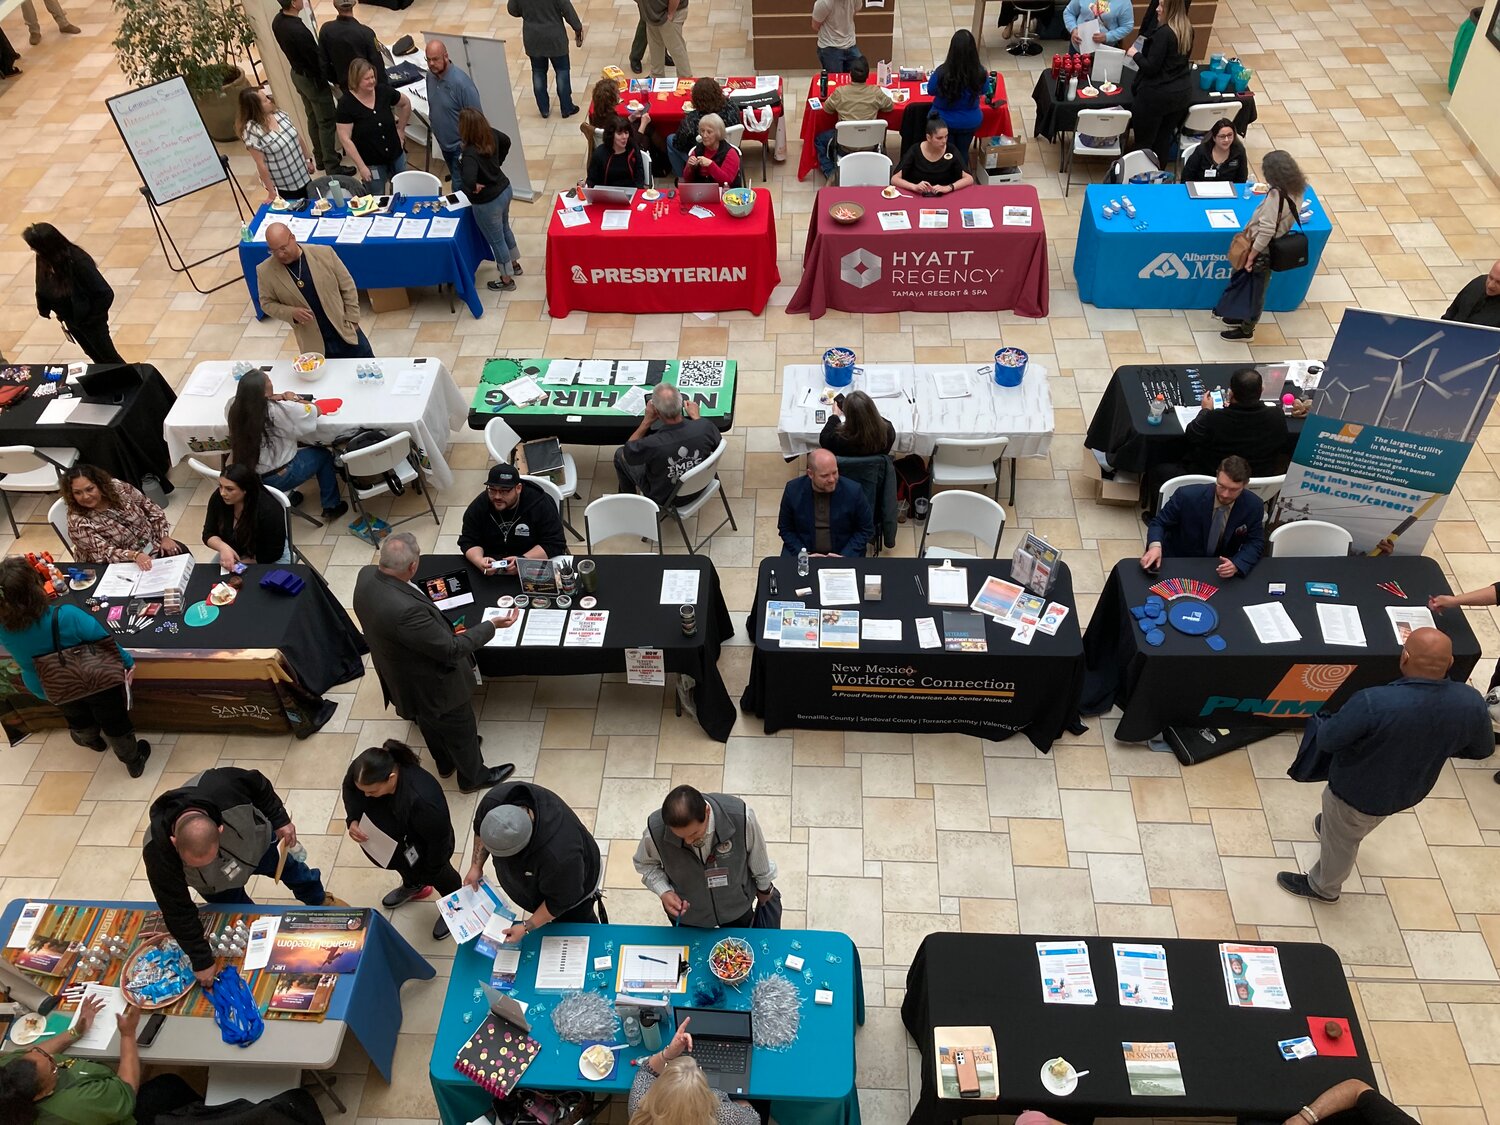 Job seekers browsed tables staffed by representatives of several local businesses during the job fair held in conjunction with Sandoval County's Founders Day celebration.